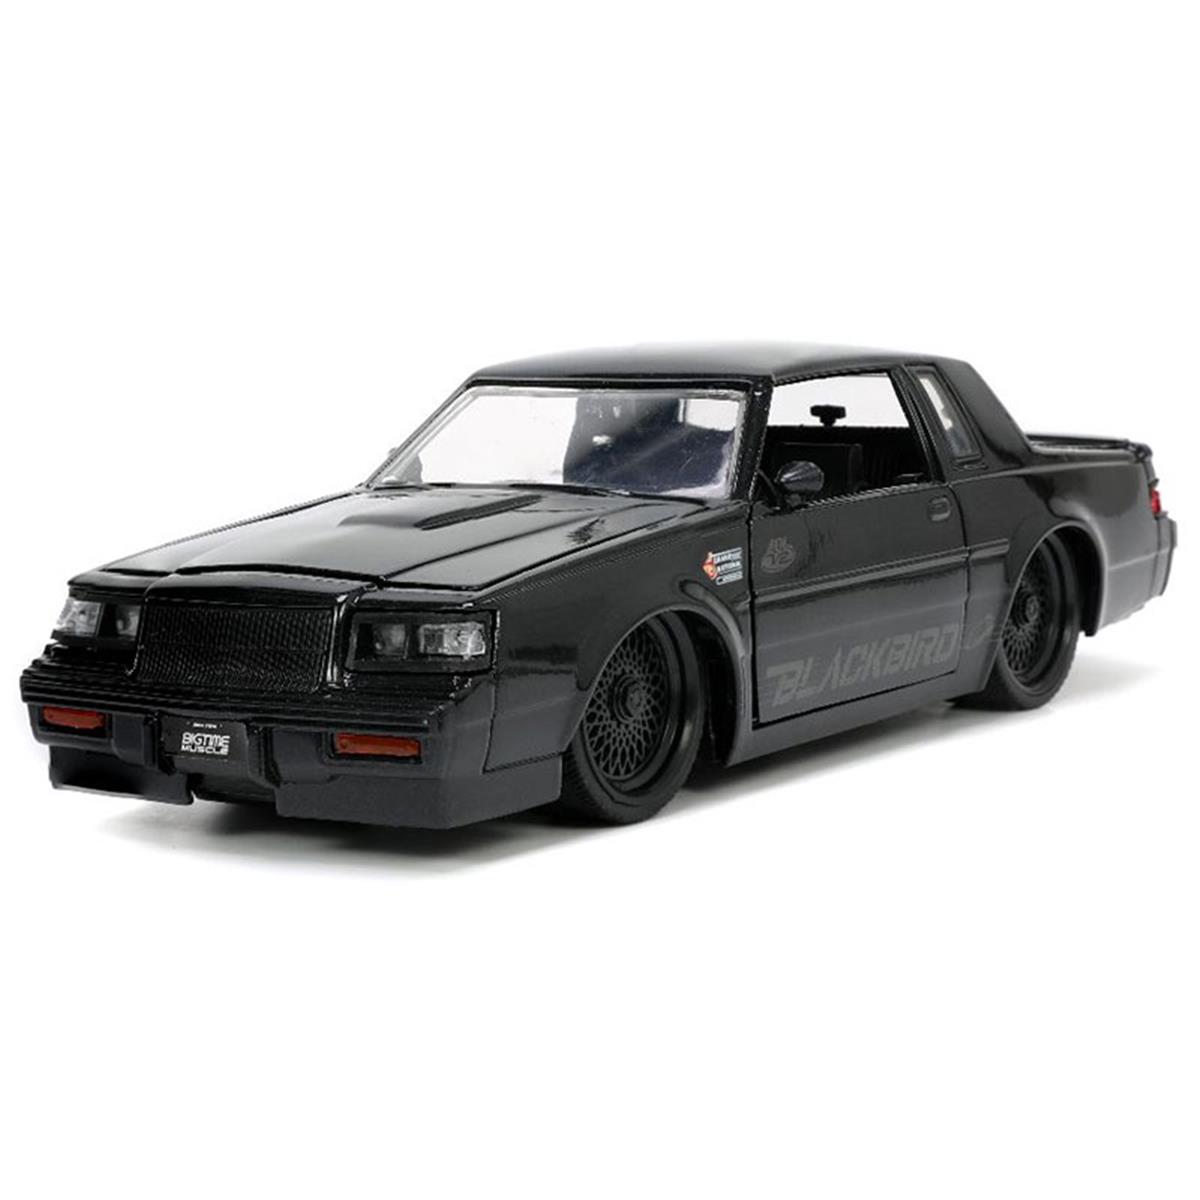 Picture of b2breplicas JAD34199 1987 Buick Grand National with BTM 1-24 Scale Diecast Replica Model